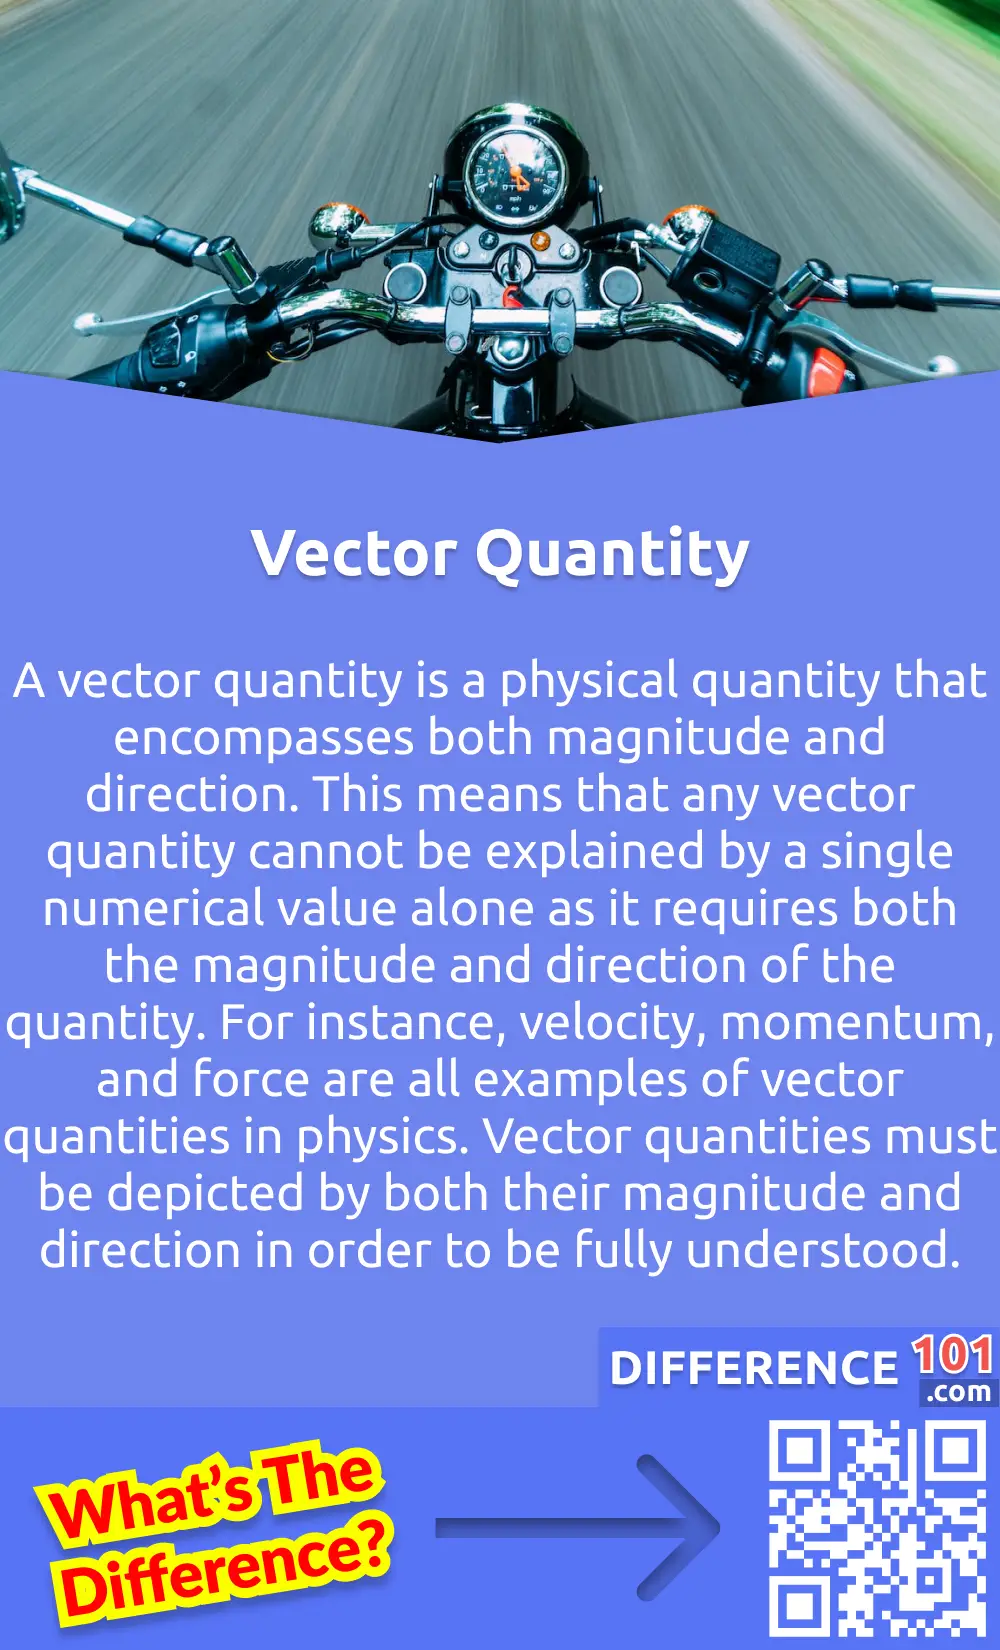 What Is Vector Quantity? A vector quantity is a physical quantity that encompasses both magnitude and direction. This means that any vector quantity cannot be explained by a single numerical value alone as it requires both the magnitude and direction of the quantity. For instance, velocity, momentum, and force are all examples of vector quantities in physics. While scalar quantities are represented only by their magnitude or numerical value, vector quantities must be depicted by both their magnitude and direction in order to be fully understood. Vector quantities play a crucial role in physics as they provide a useful framework for explaining and analyzing a range of physical phenomena. Thus, an understanding of vector quantities is essential for anyone pursuing a career or interest in physics.